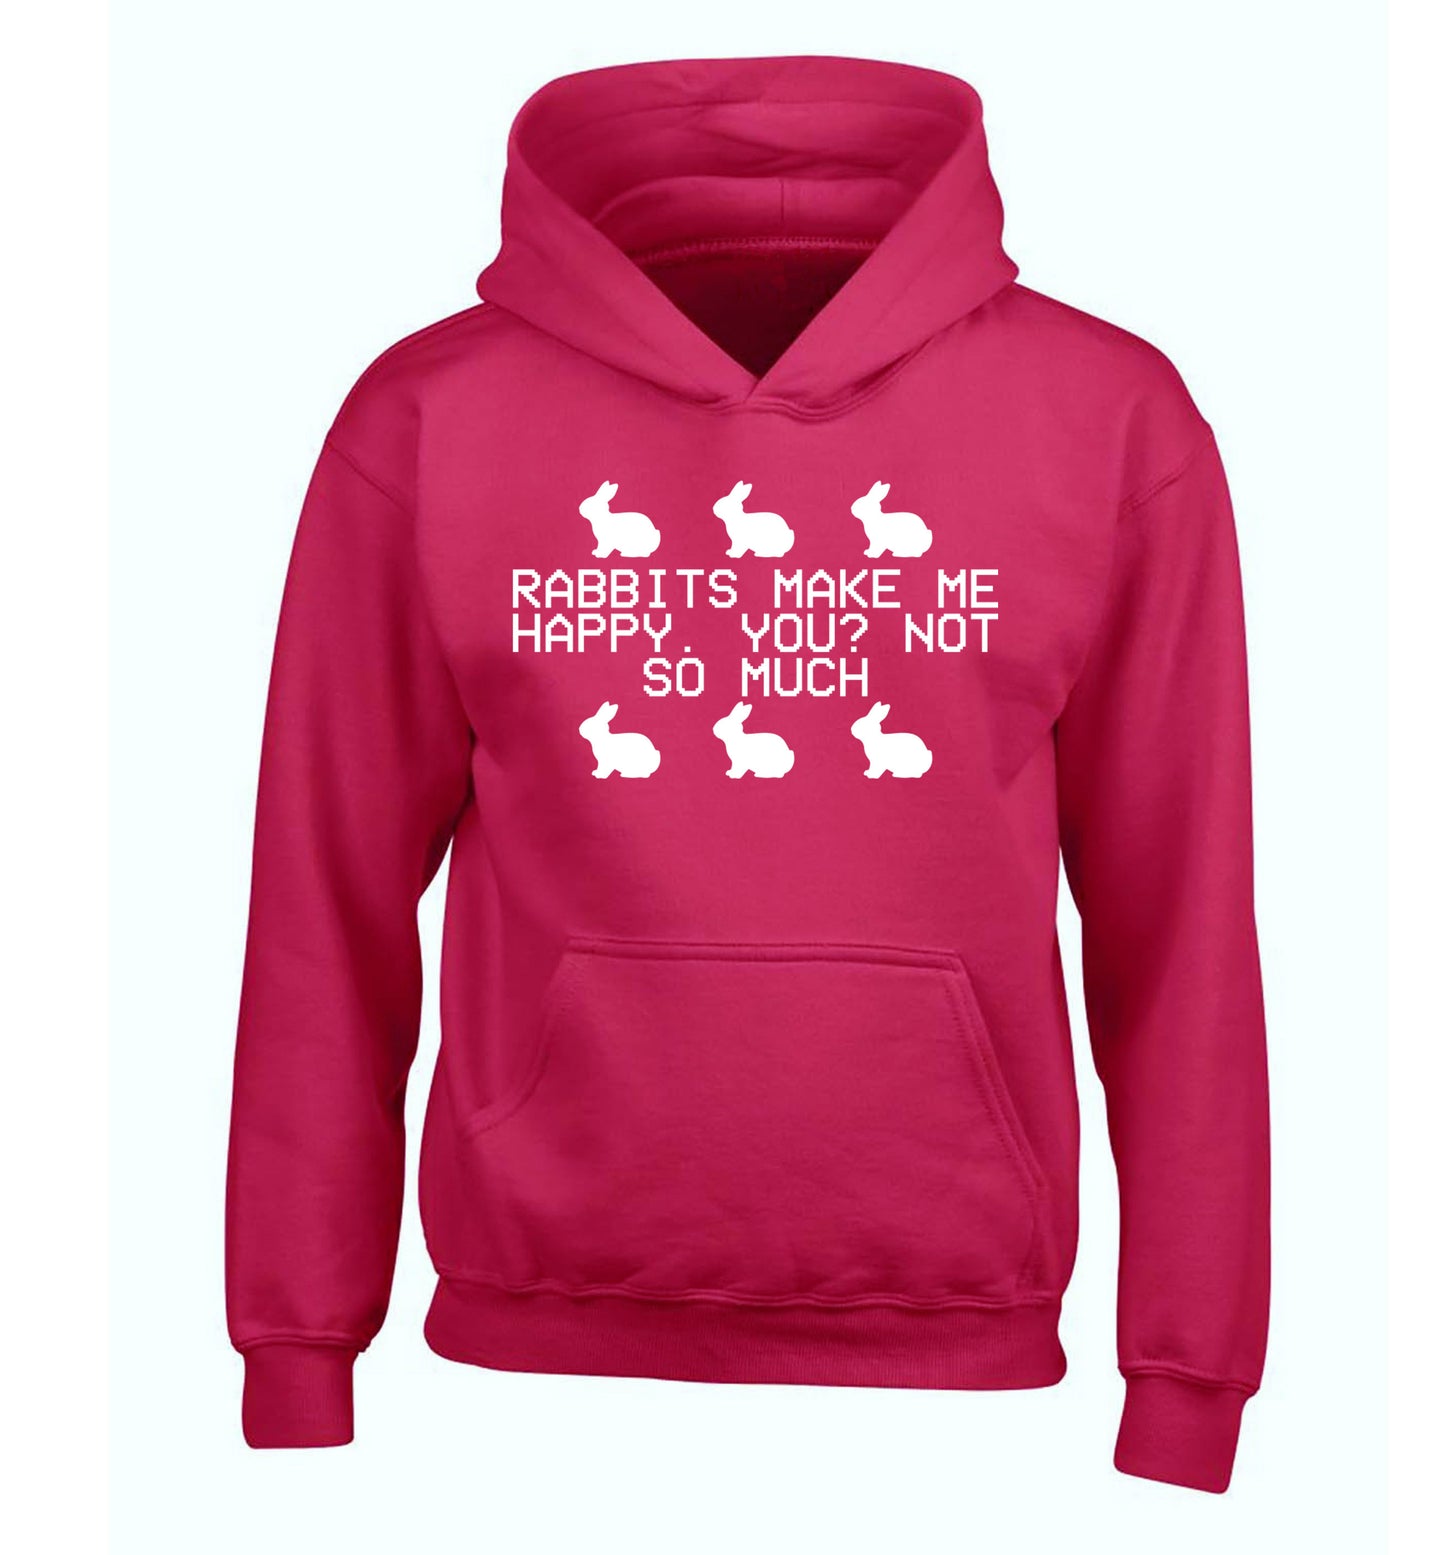 Rabbits make me happy, you not so much children's pink hoodie 12-14 Years